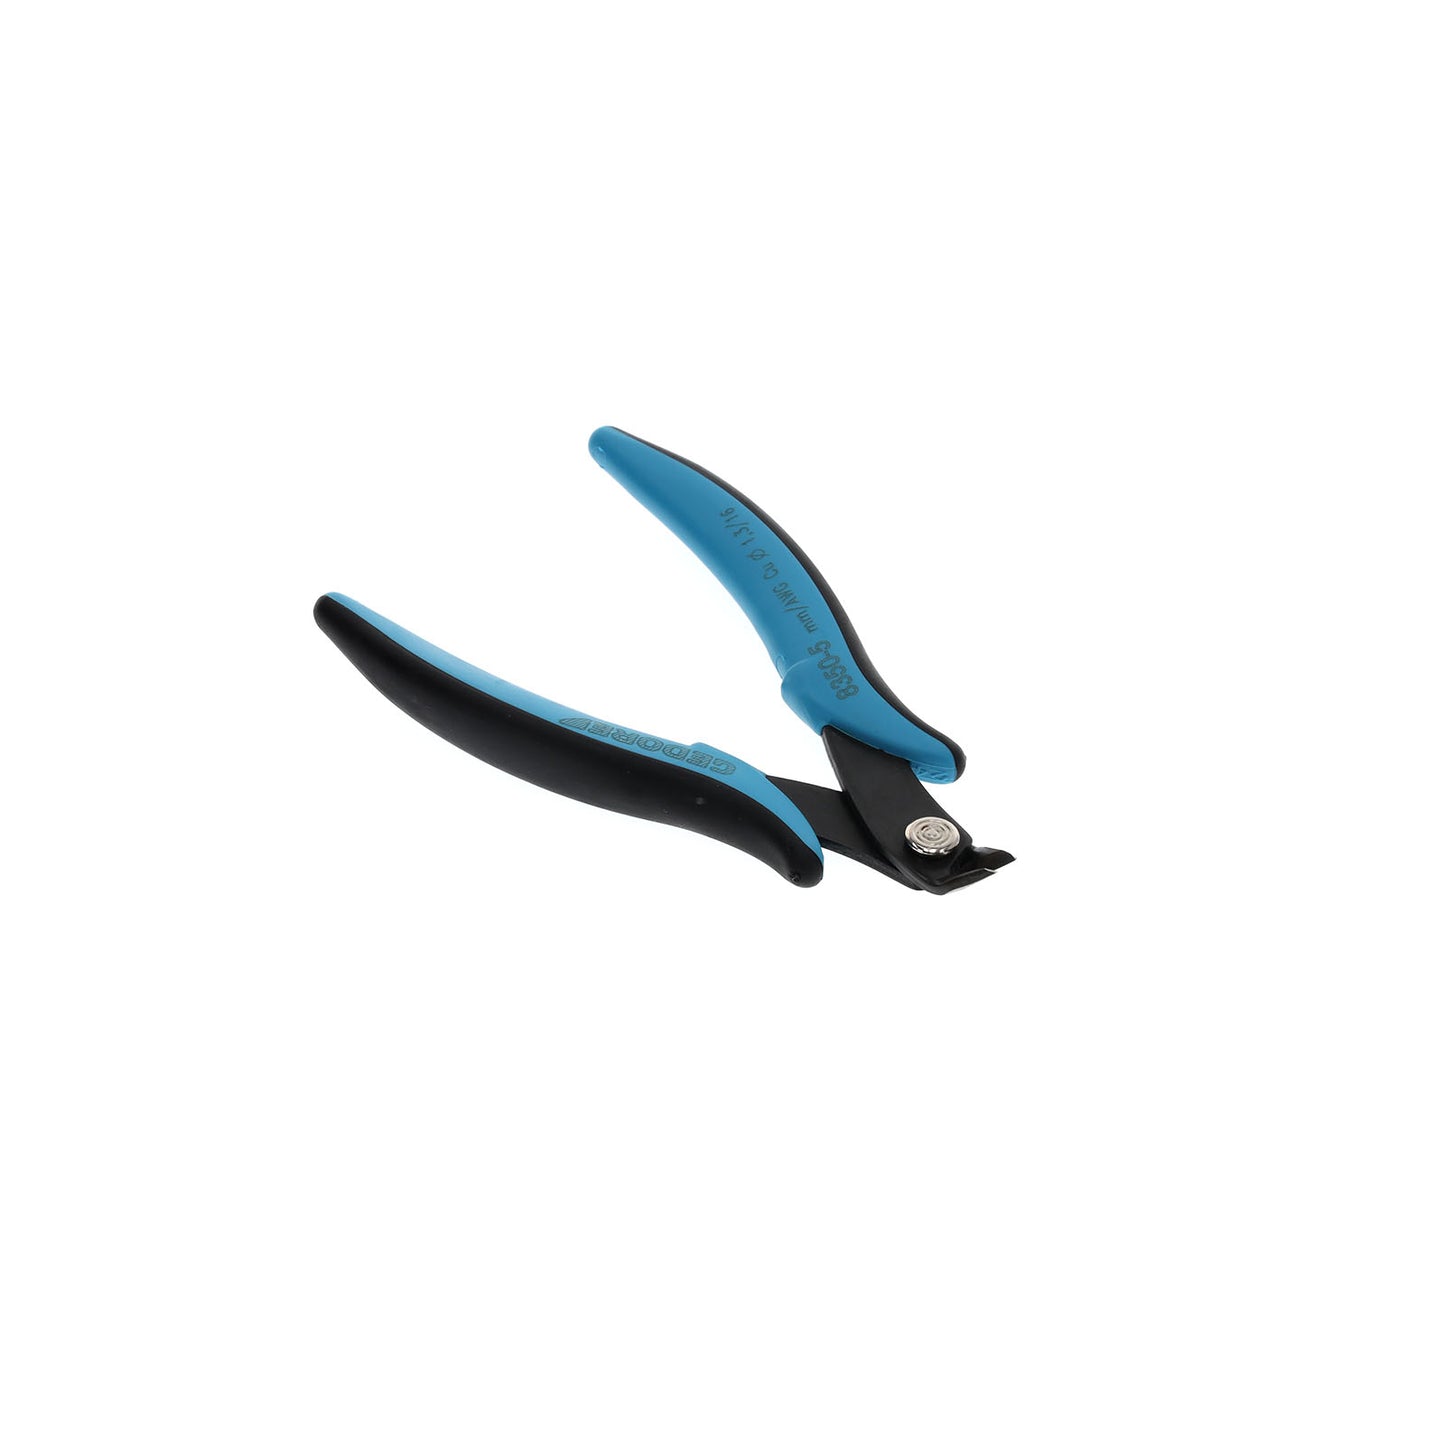 GEDORE 8350-5 - Electronic Cutting Pliers (1828991)